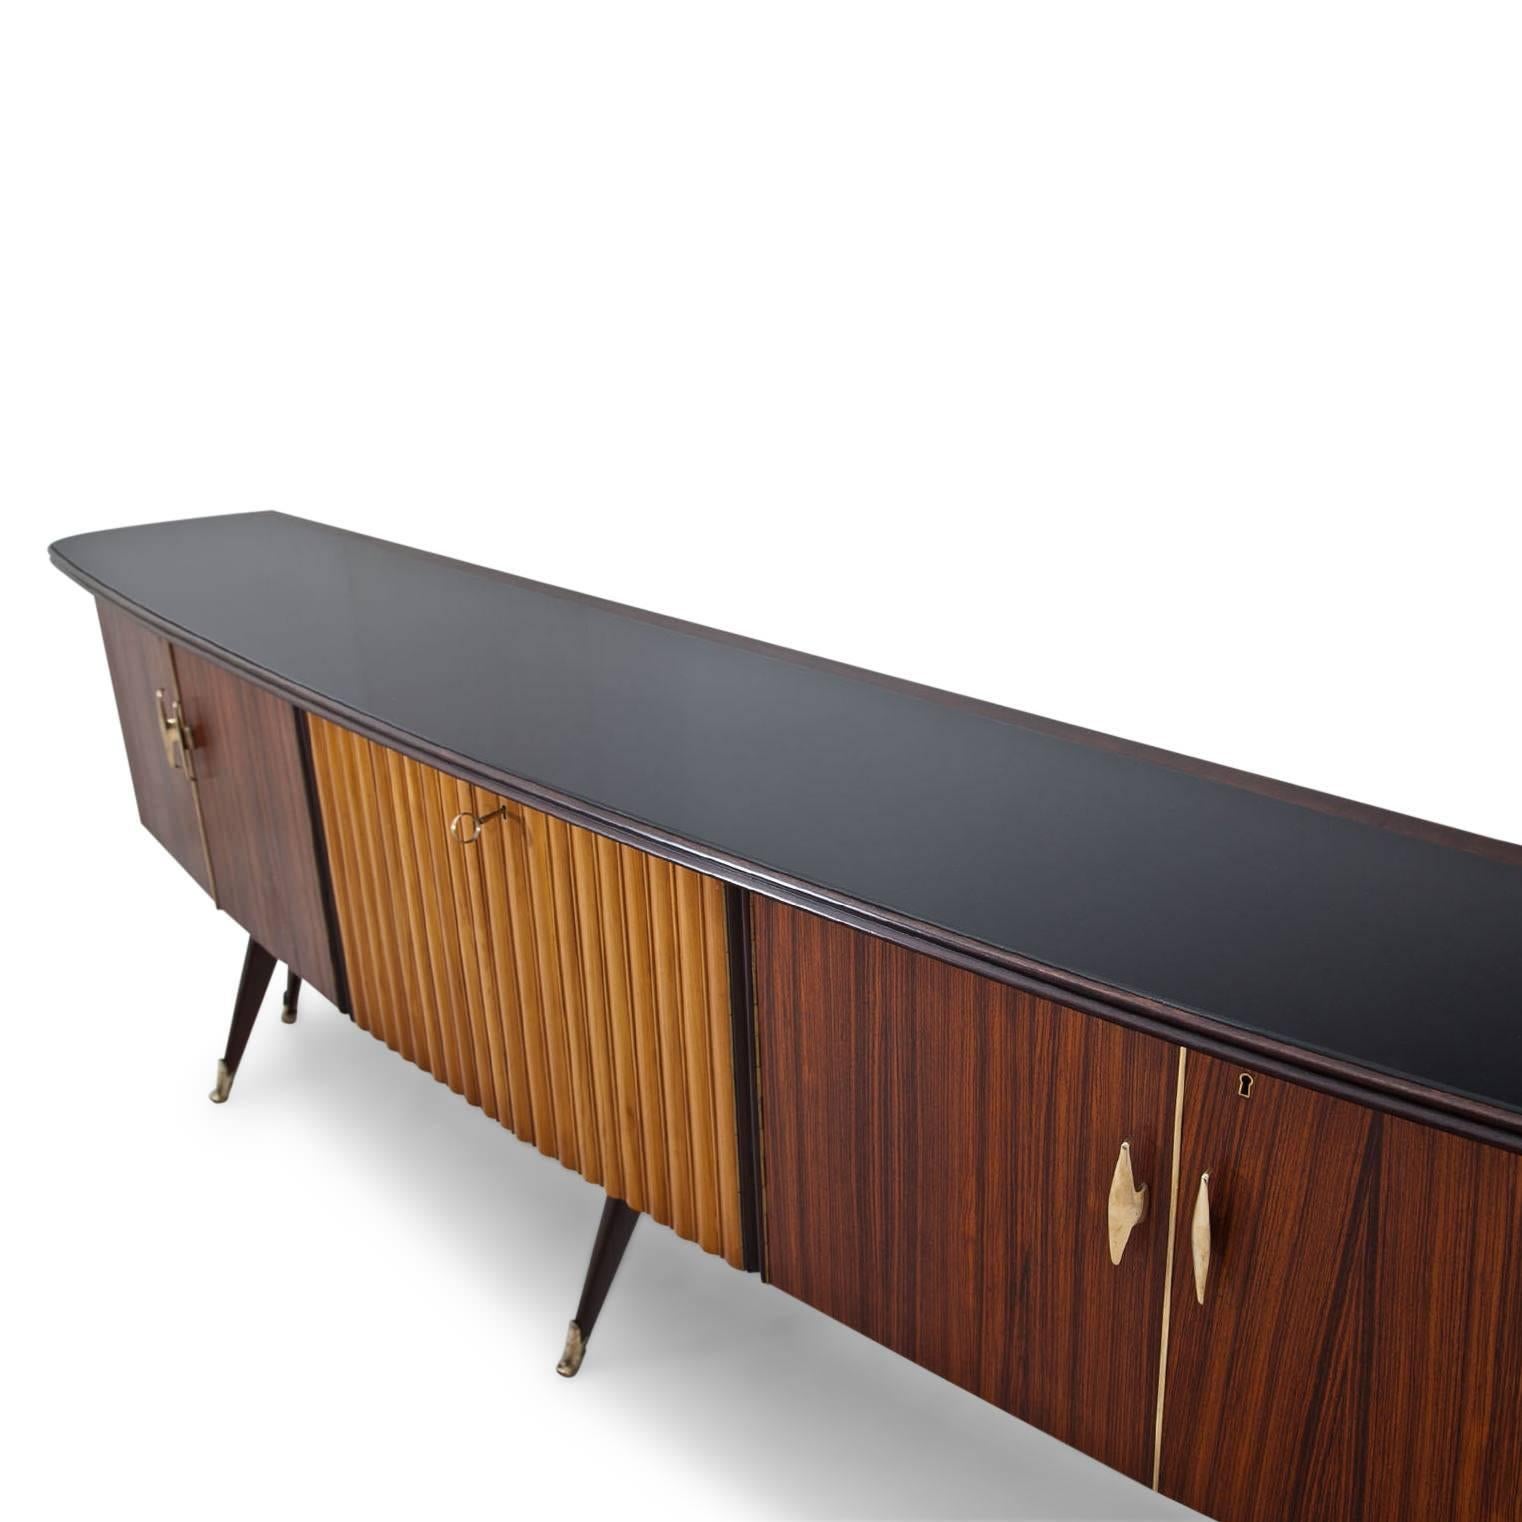 Long sideboard standing on thin legs with brass sabots and a slightly curved front. The sideboard has three compartments with double doors, the middle doors are structured with vertical groves. The sideboard was professionally refurbished.